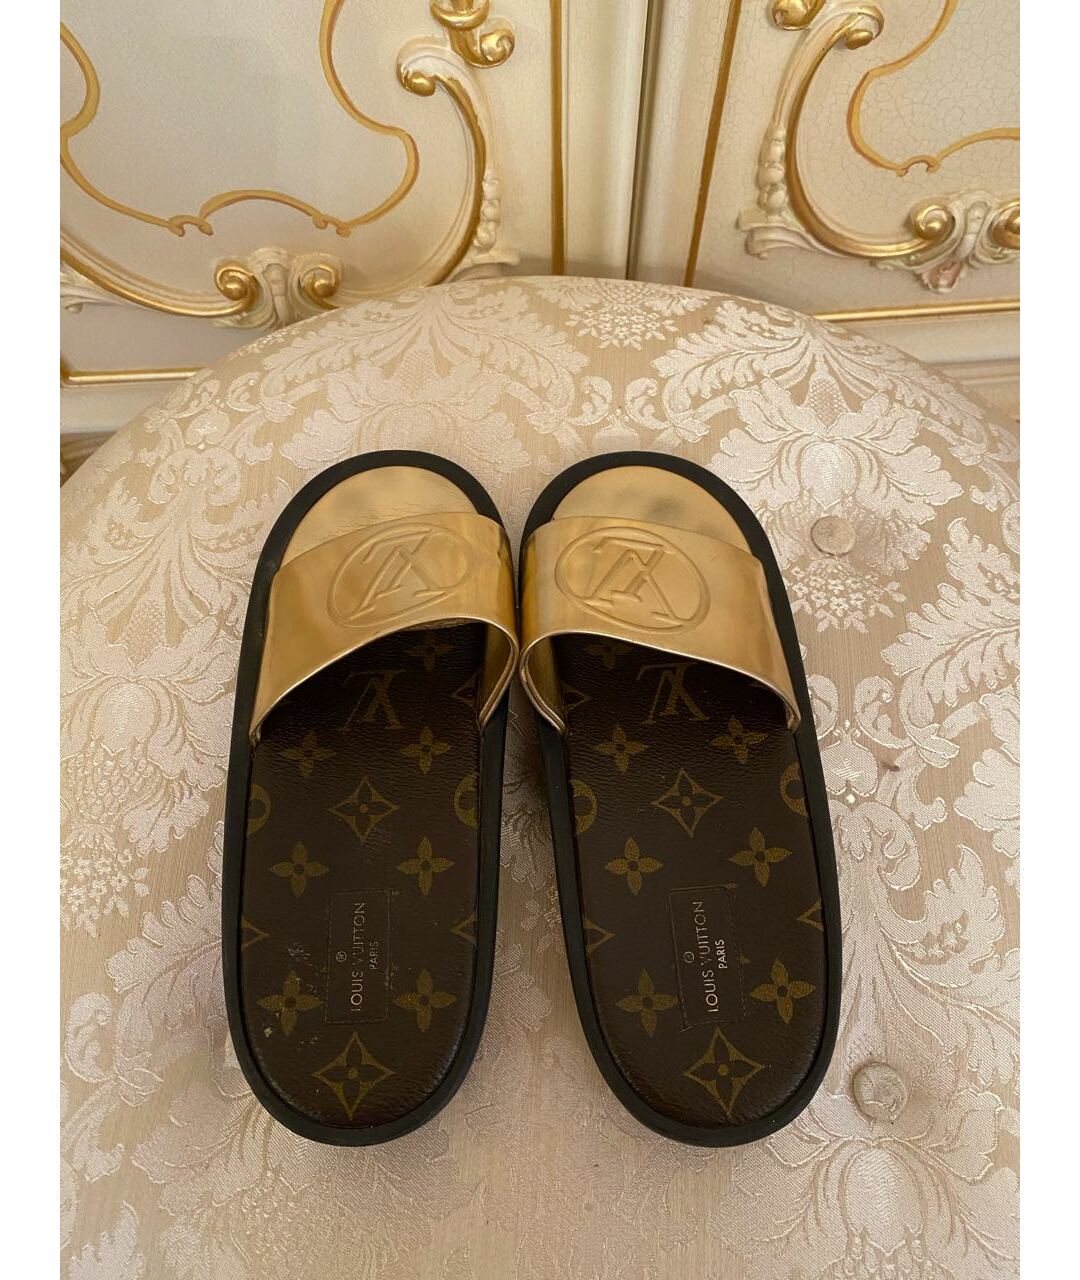 LOUIS VUITTON PRE-OWNED Золотые шлепанцы, фото 3